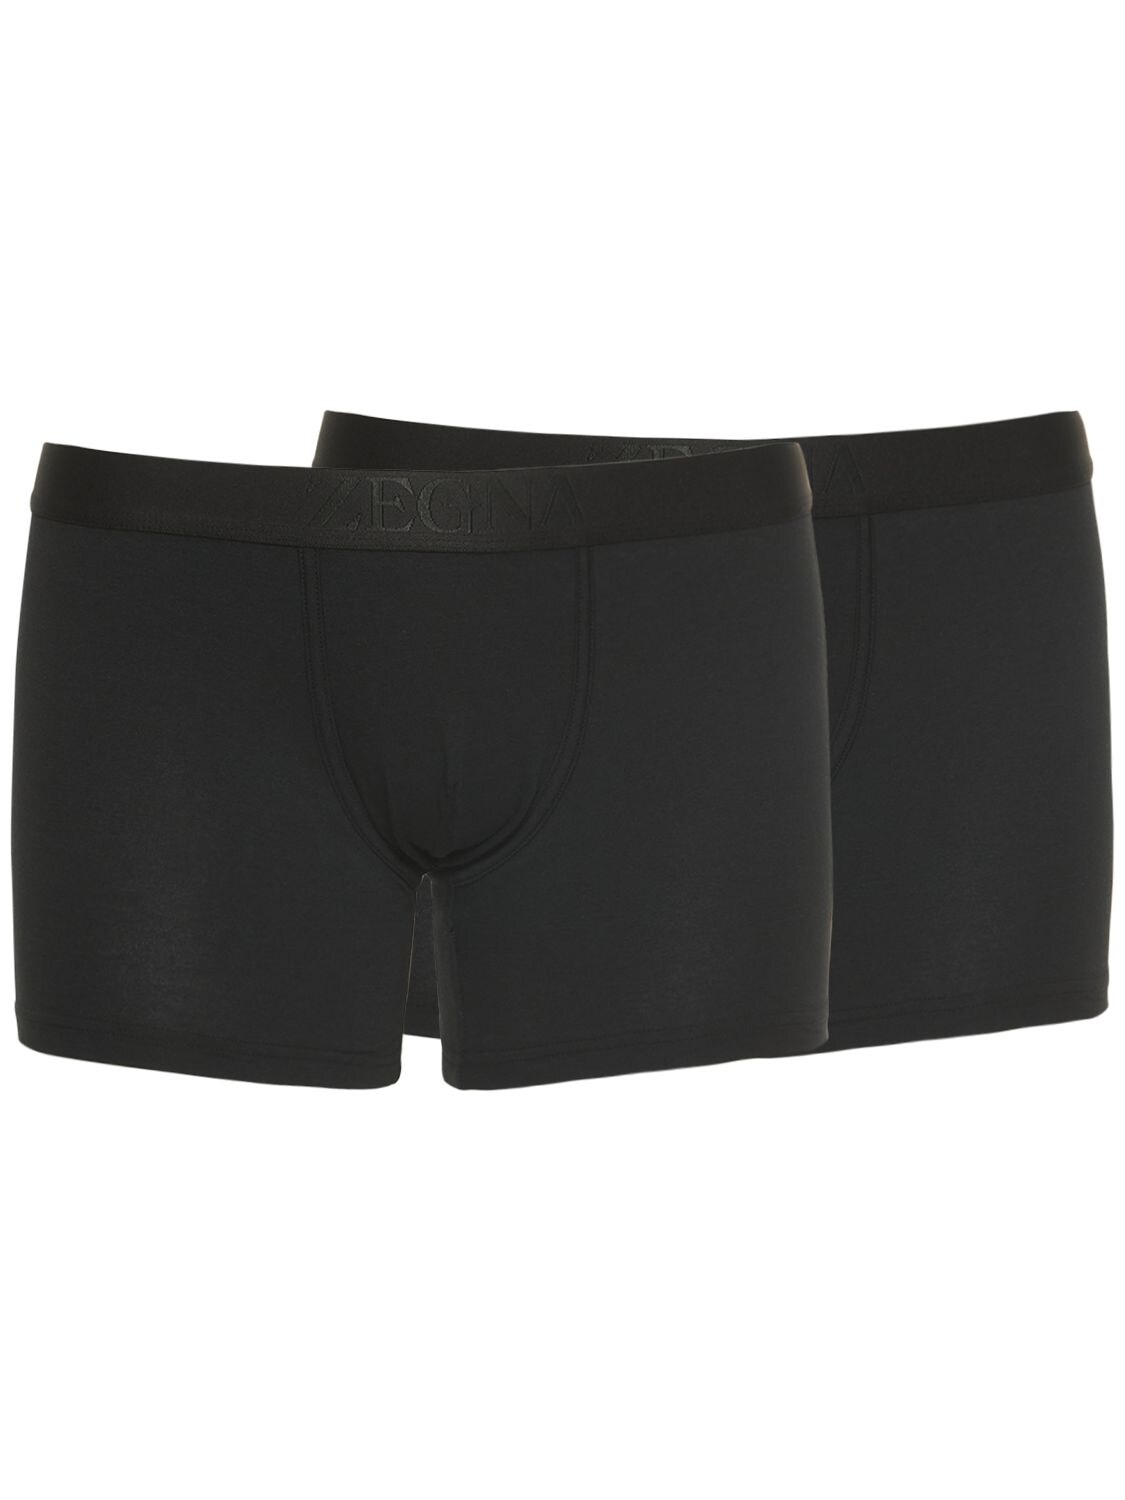 ZEGNA Pack Of 2 Logo Stretch Cotton Boxers